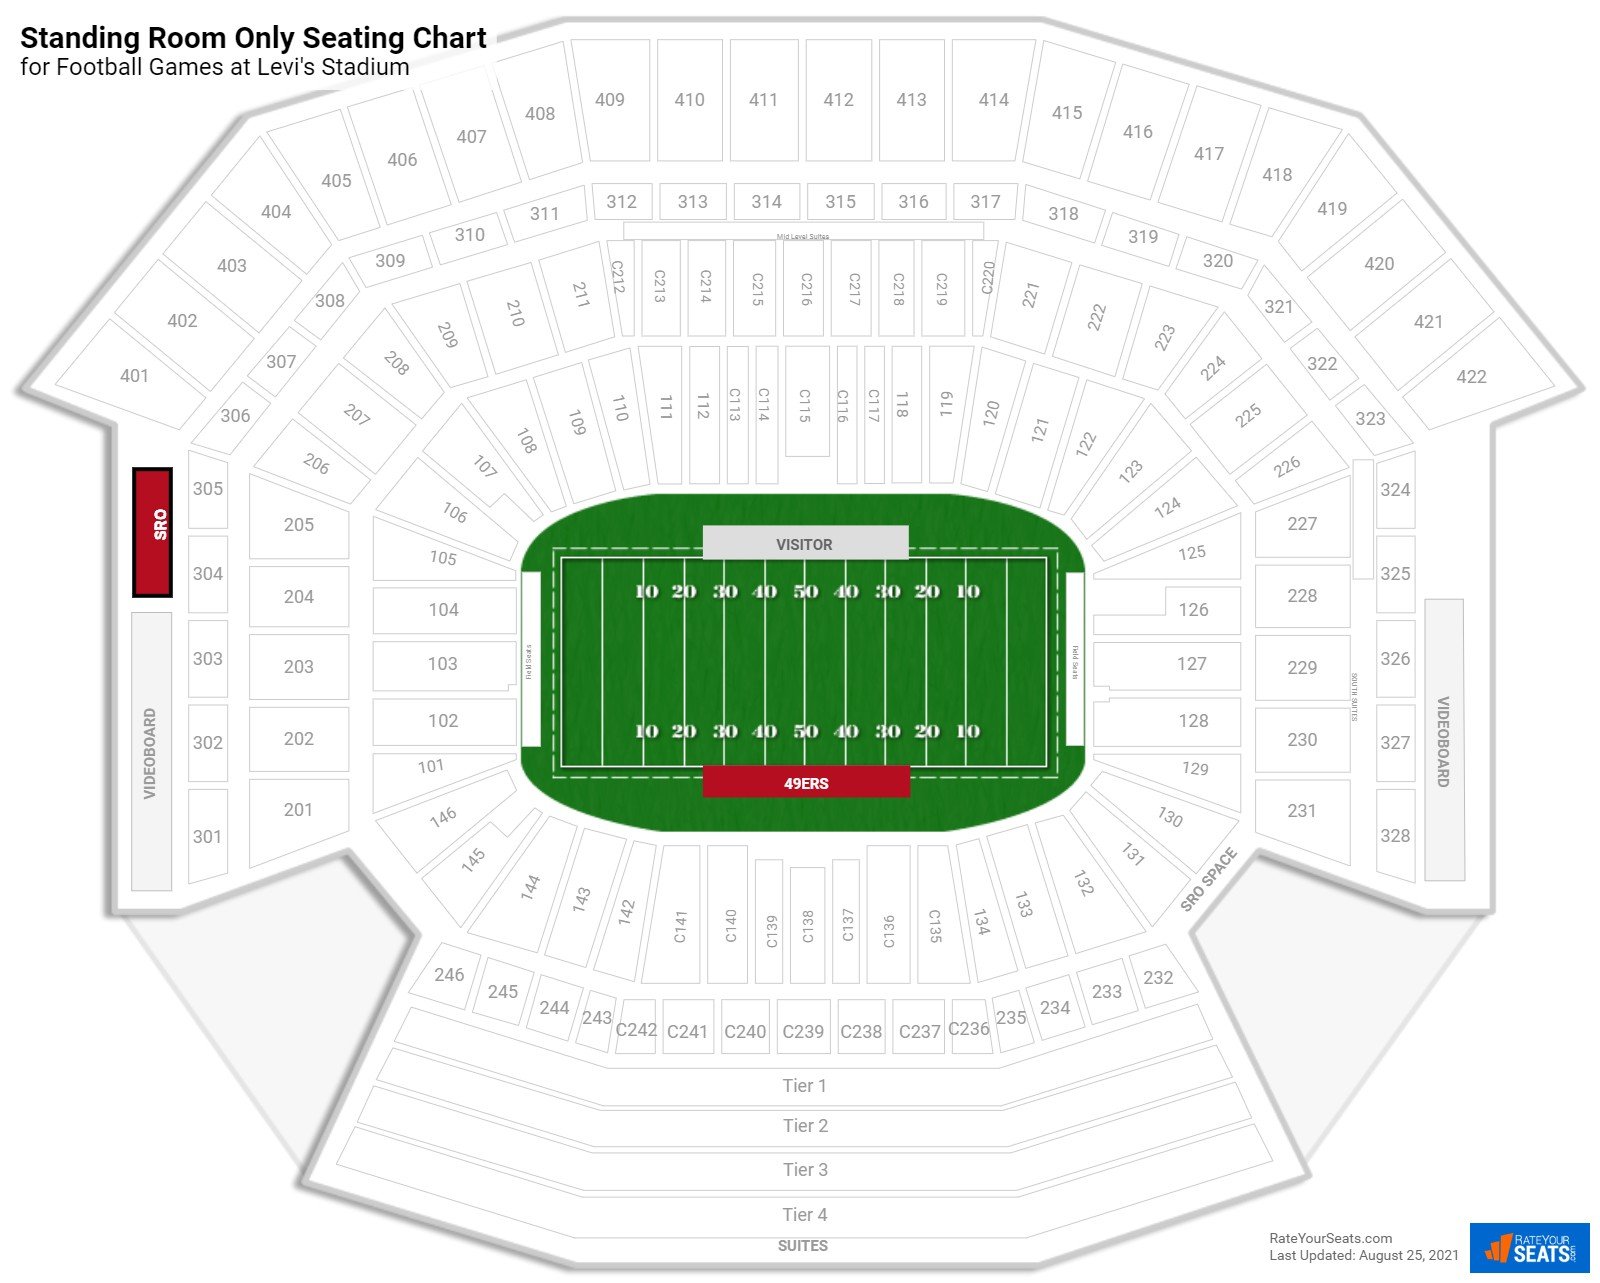 Standing Room Only Tickets at Levi's Stadium 